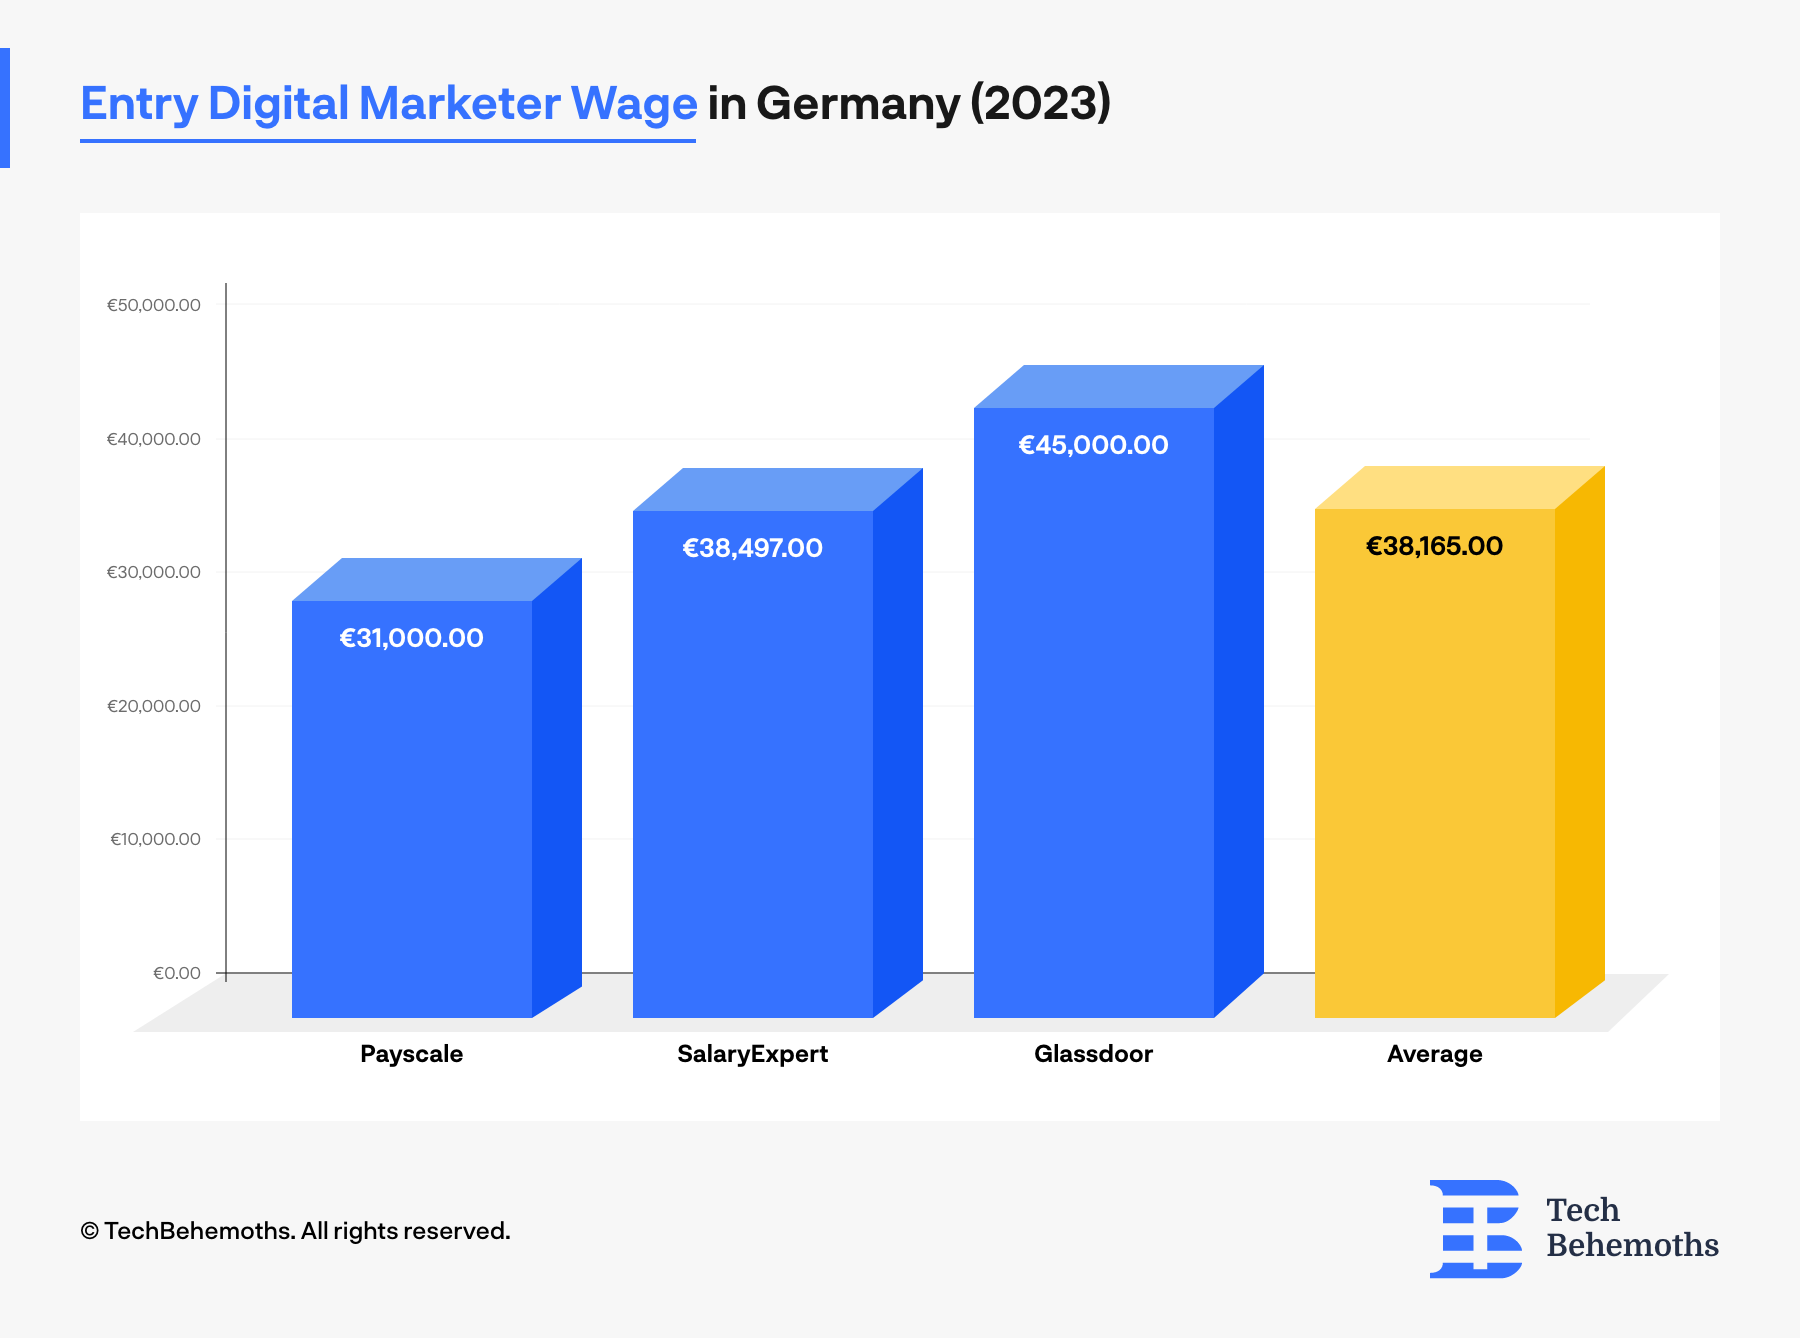 Entry Digital Marketer Wage in Germany (2023)